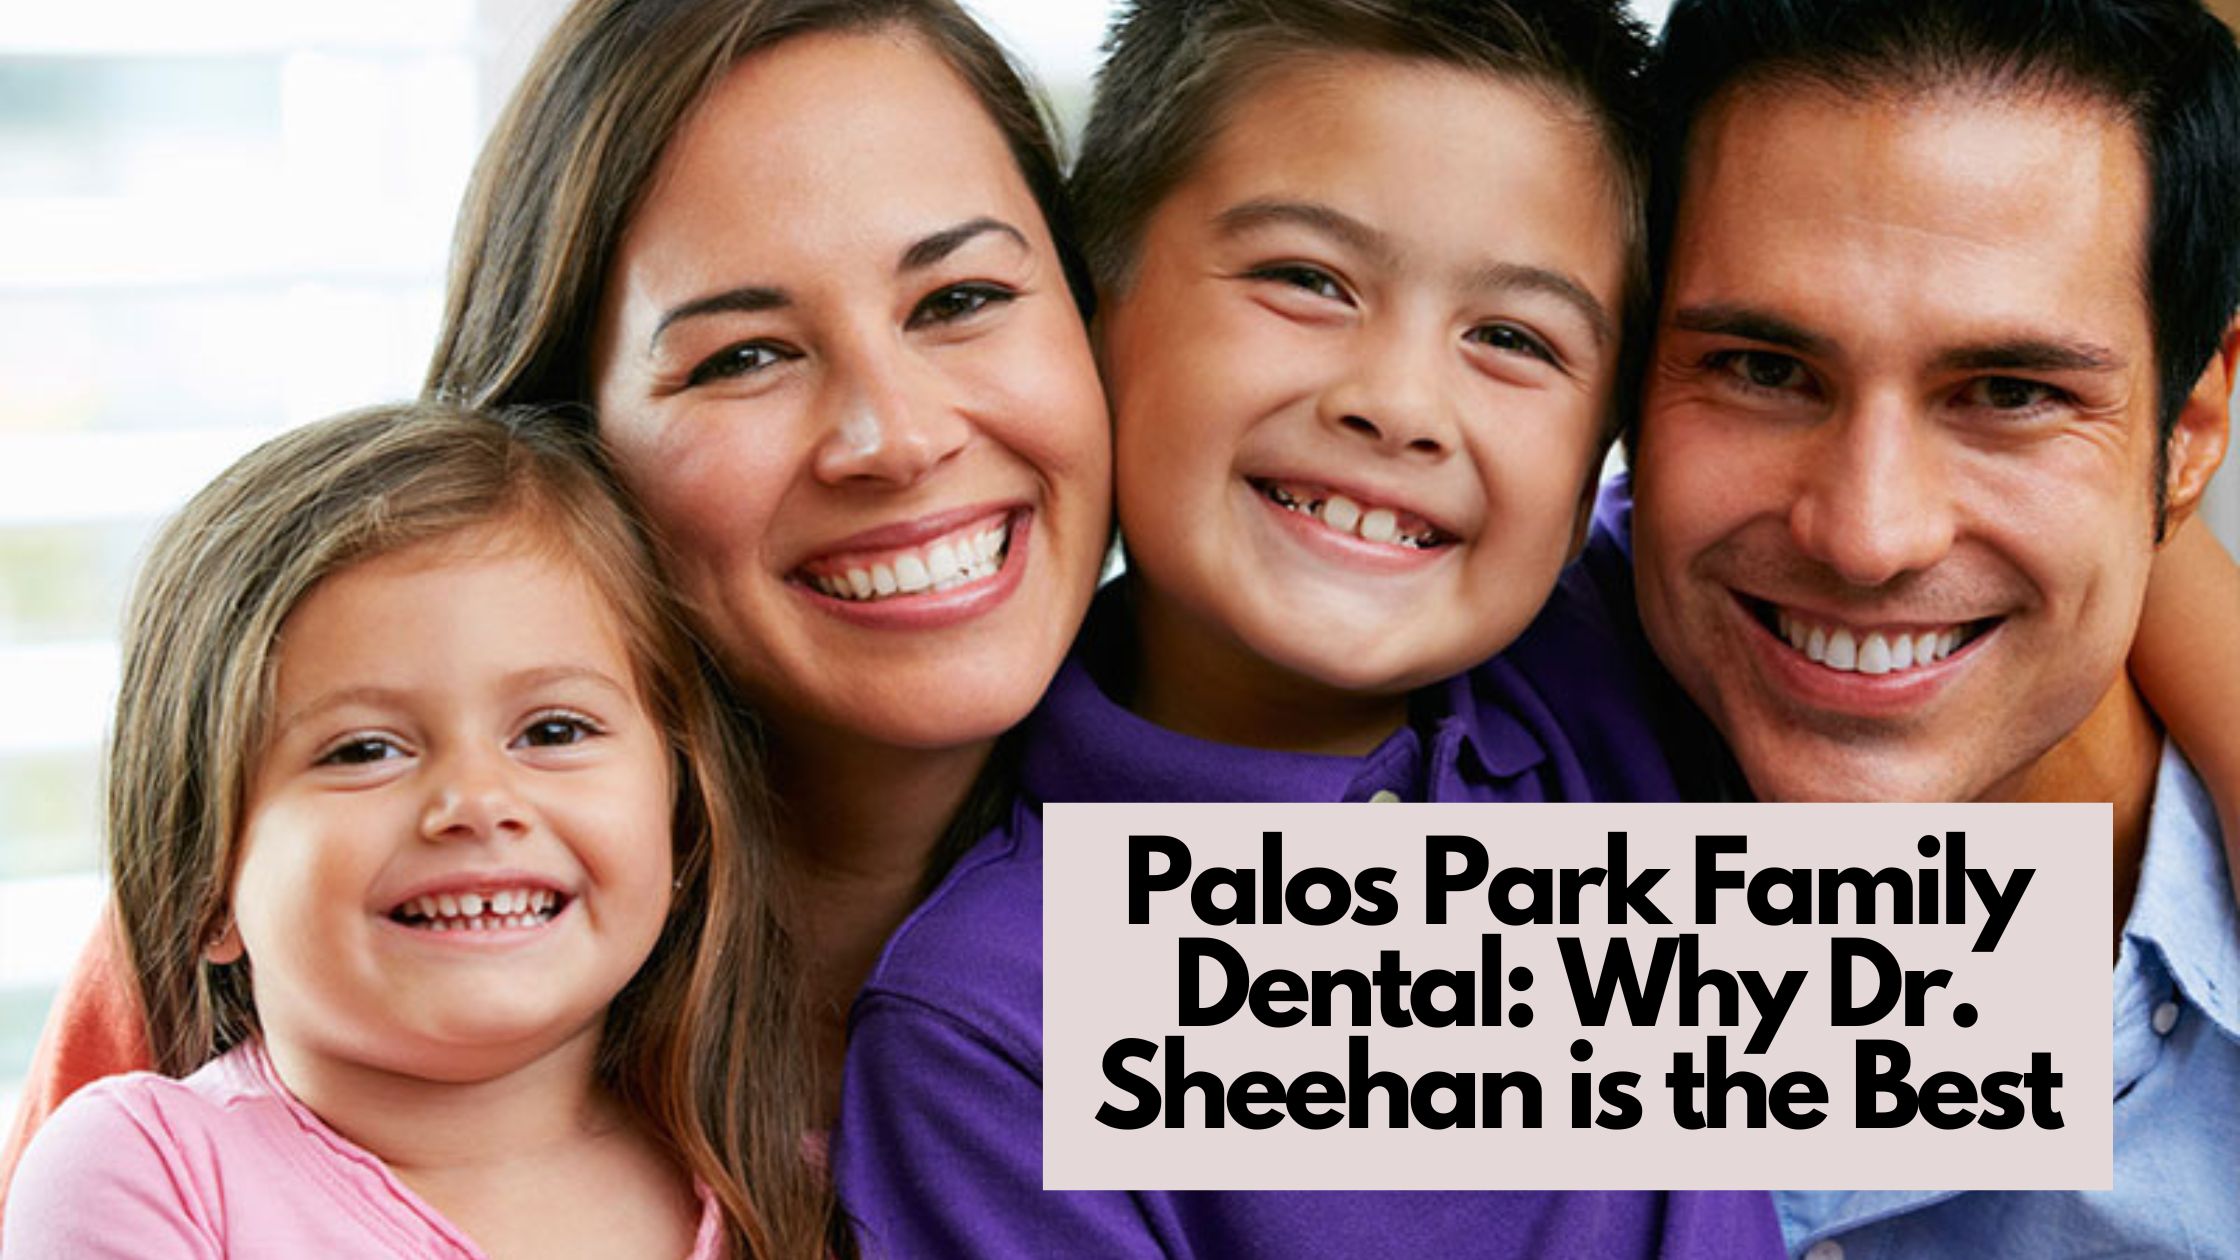 Palos Park Family Dental: Why Dr. Sheehan is the Best